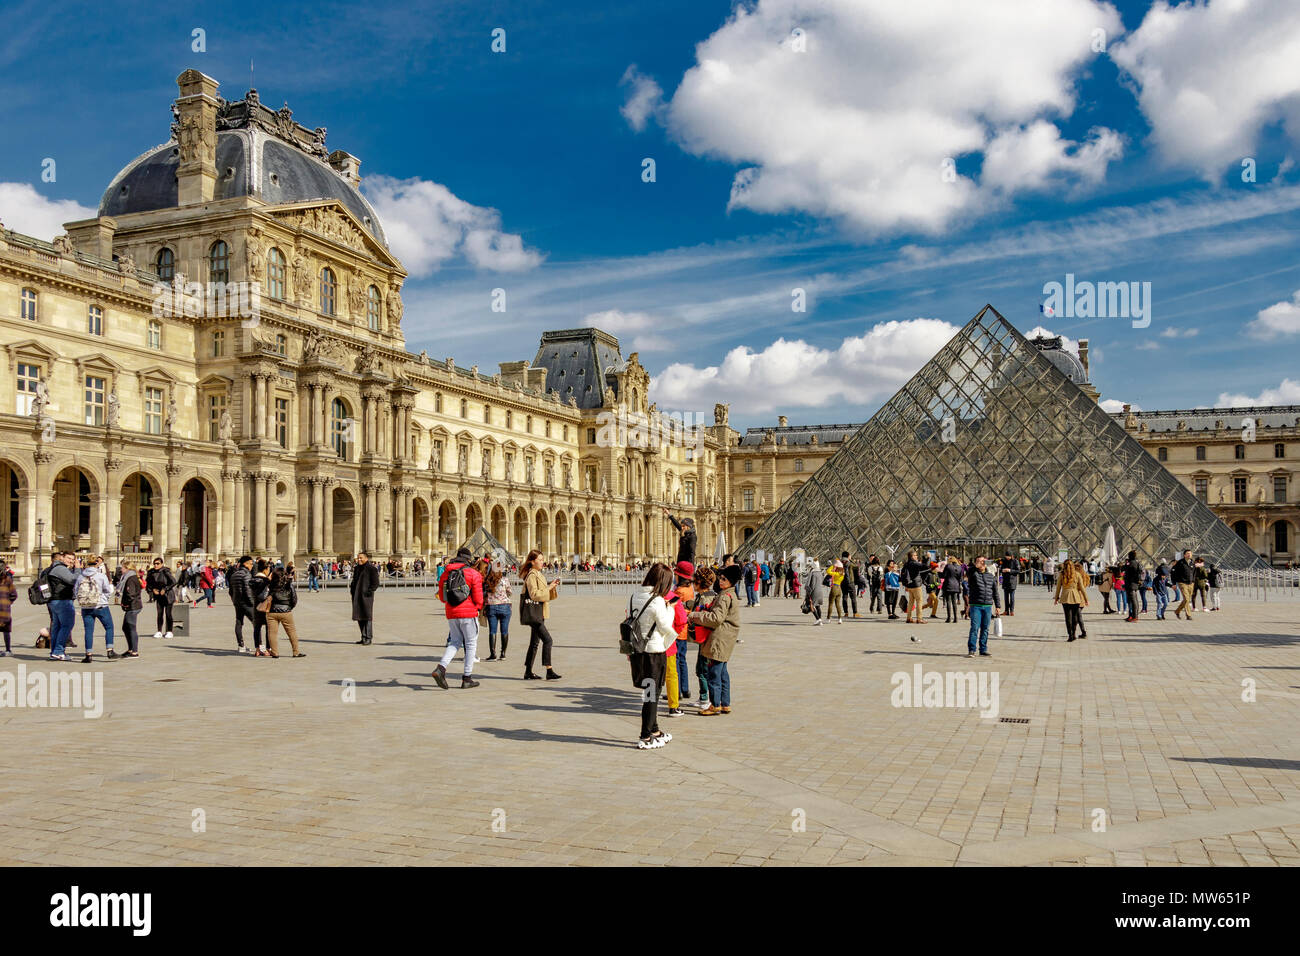 People outside The Louvre Pyramid , the main entrance to the The Louvre museum in Paris,France Stock Photo